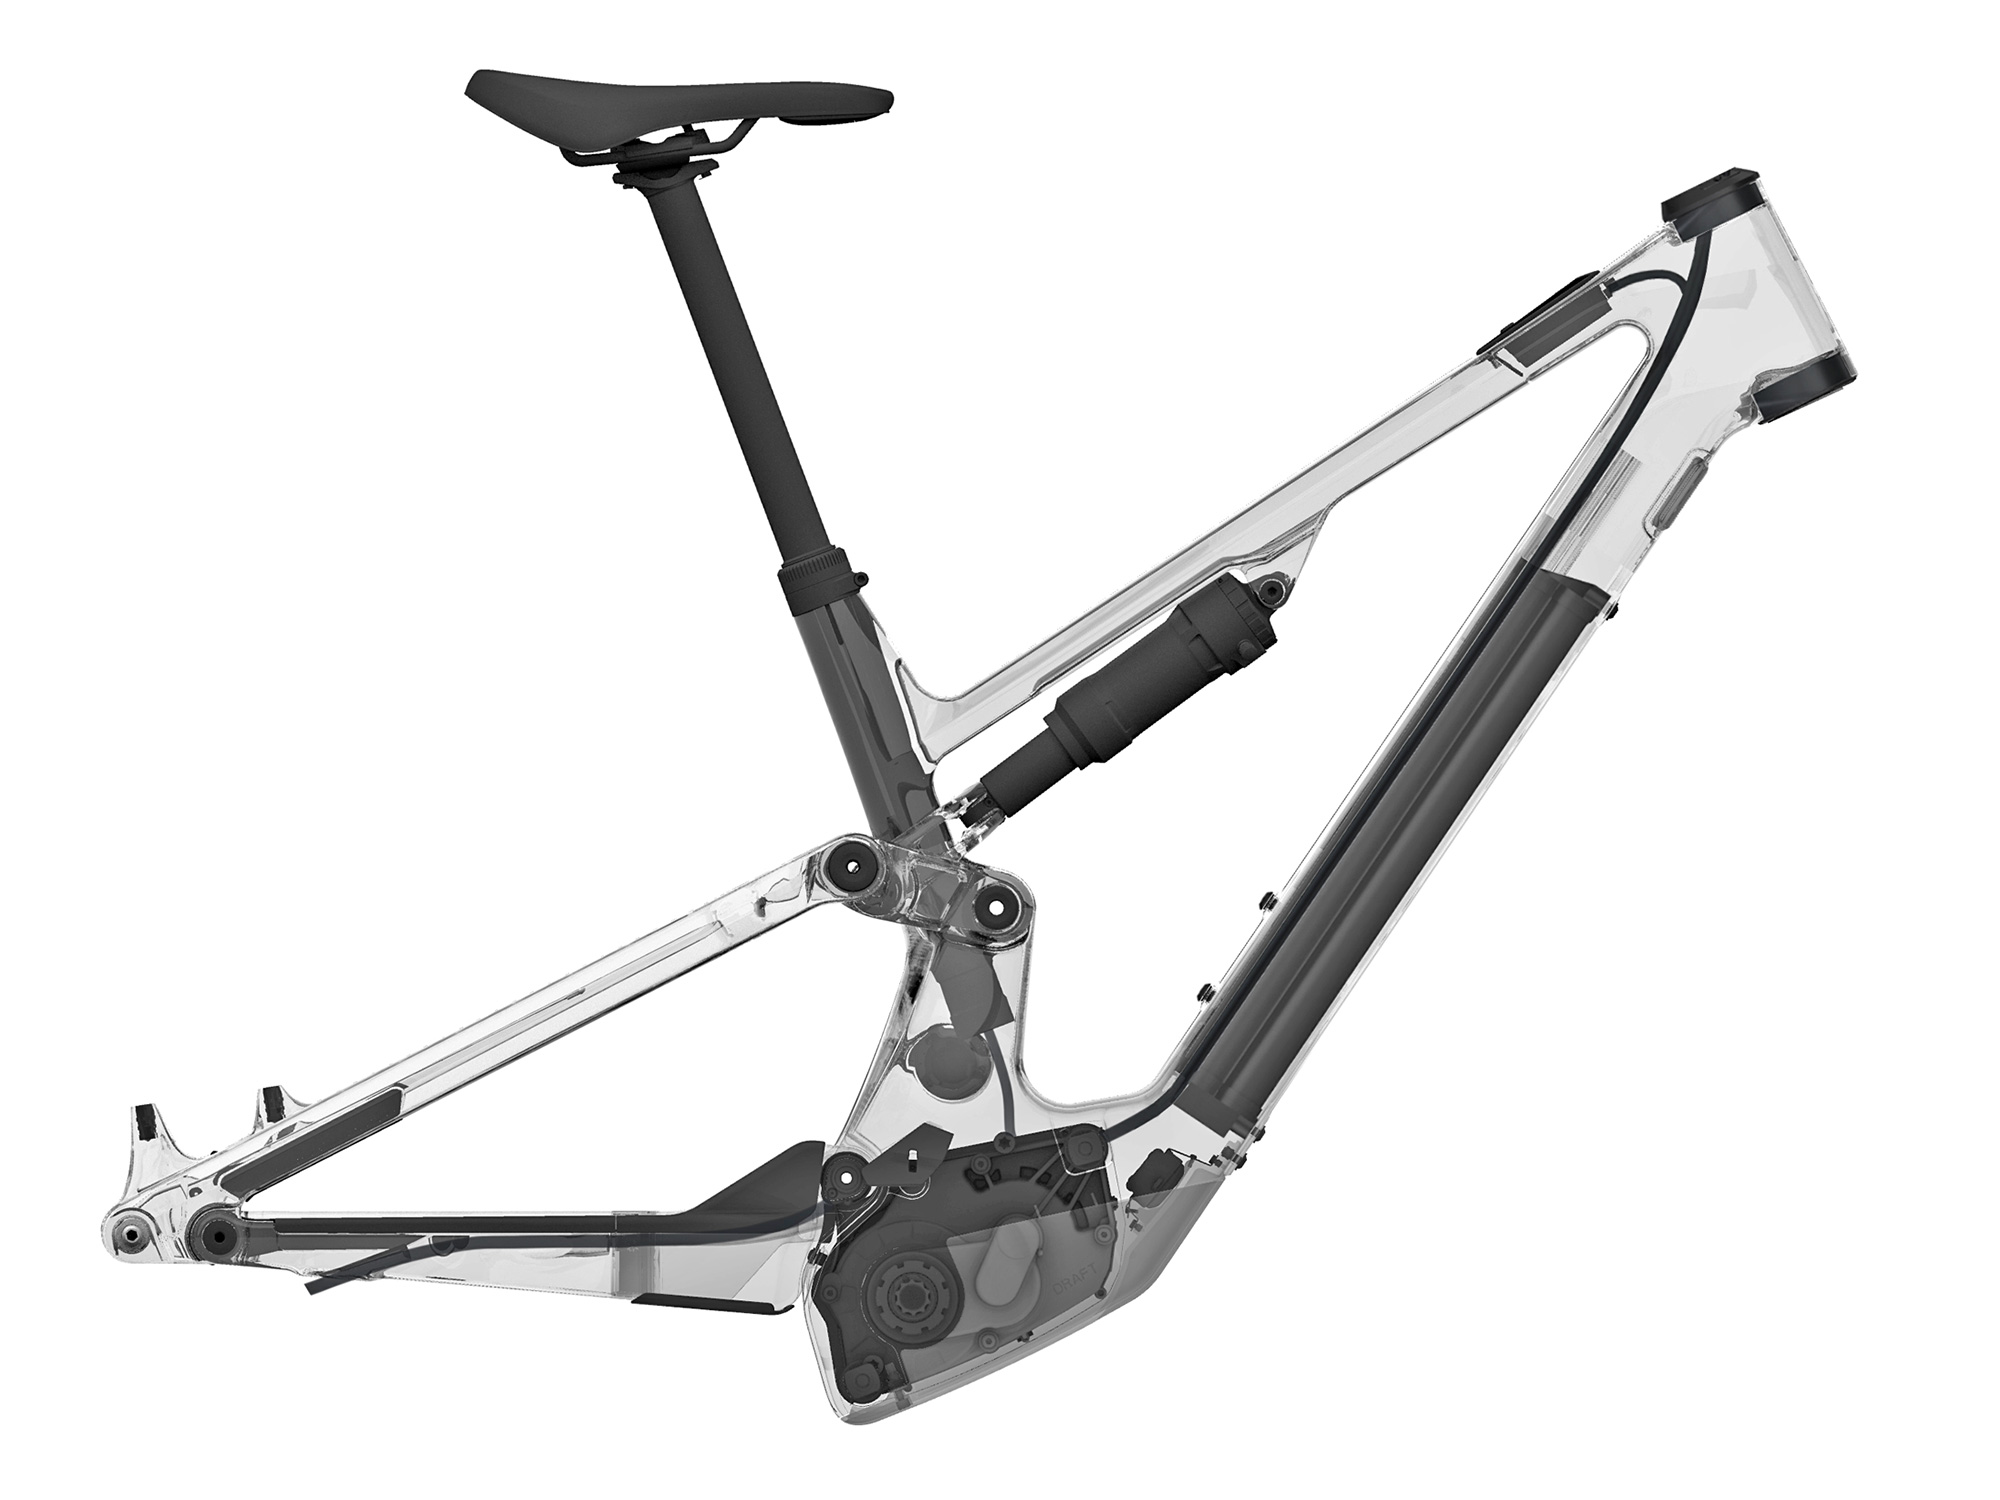 Canyon Neuron:ONfly lightweight 140mm carbon trail ebike with Bosch SX motor, What's inside a modern eMTB: X-Ray view